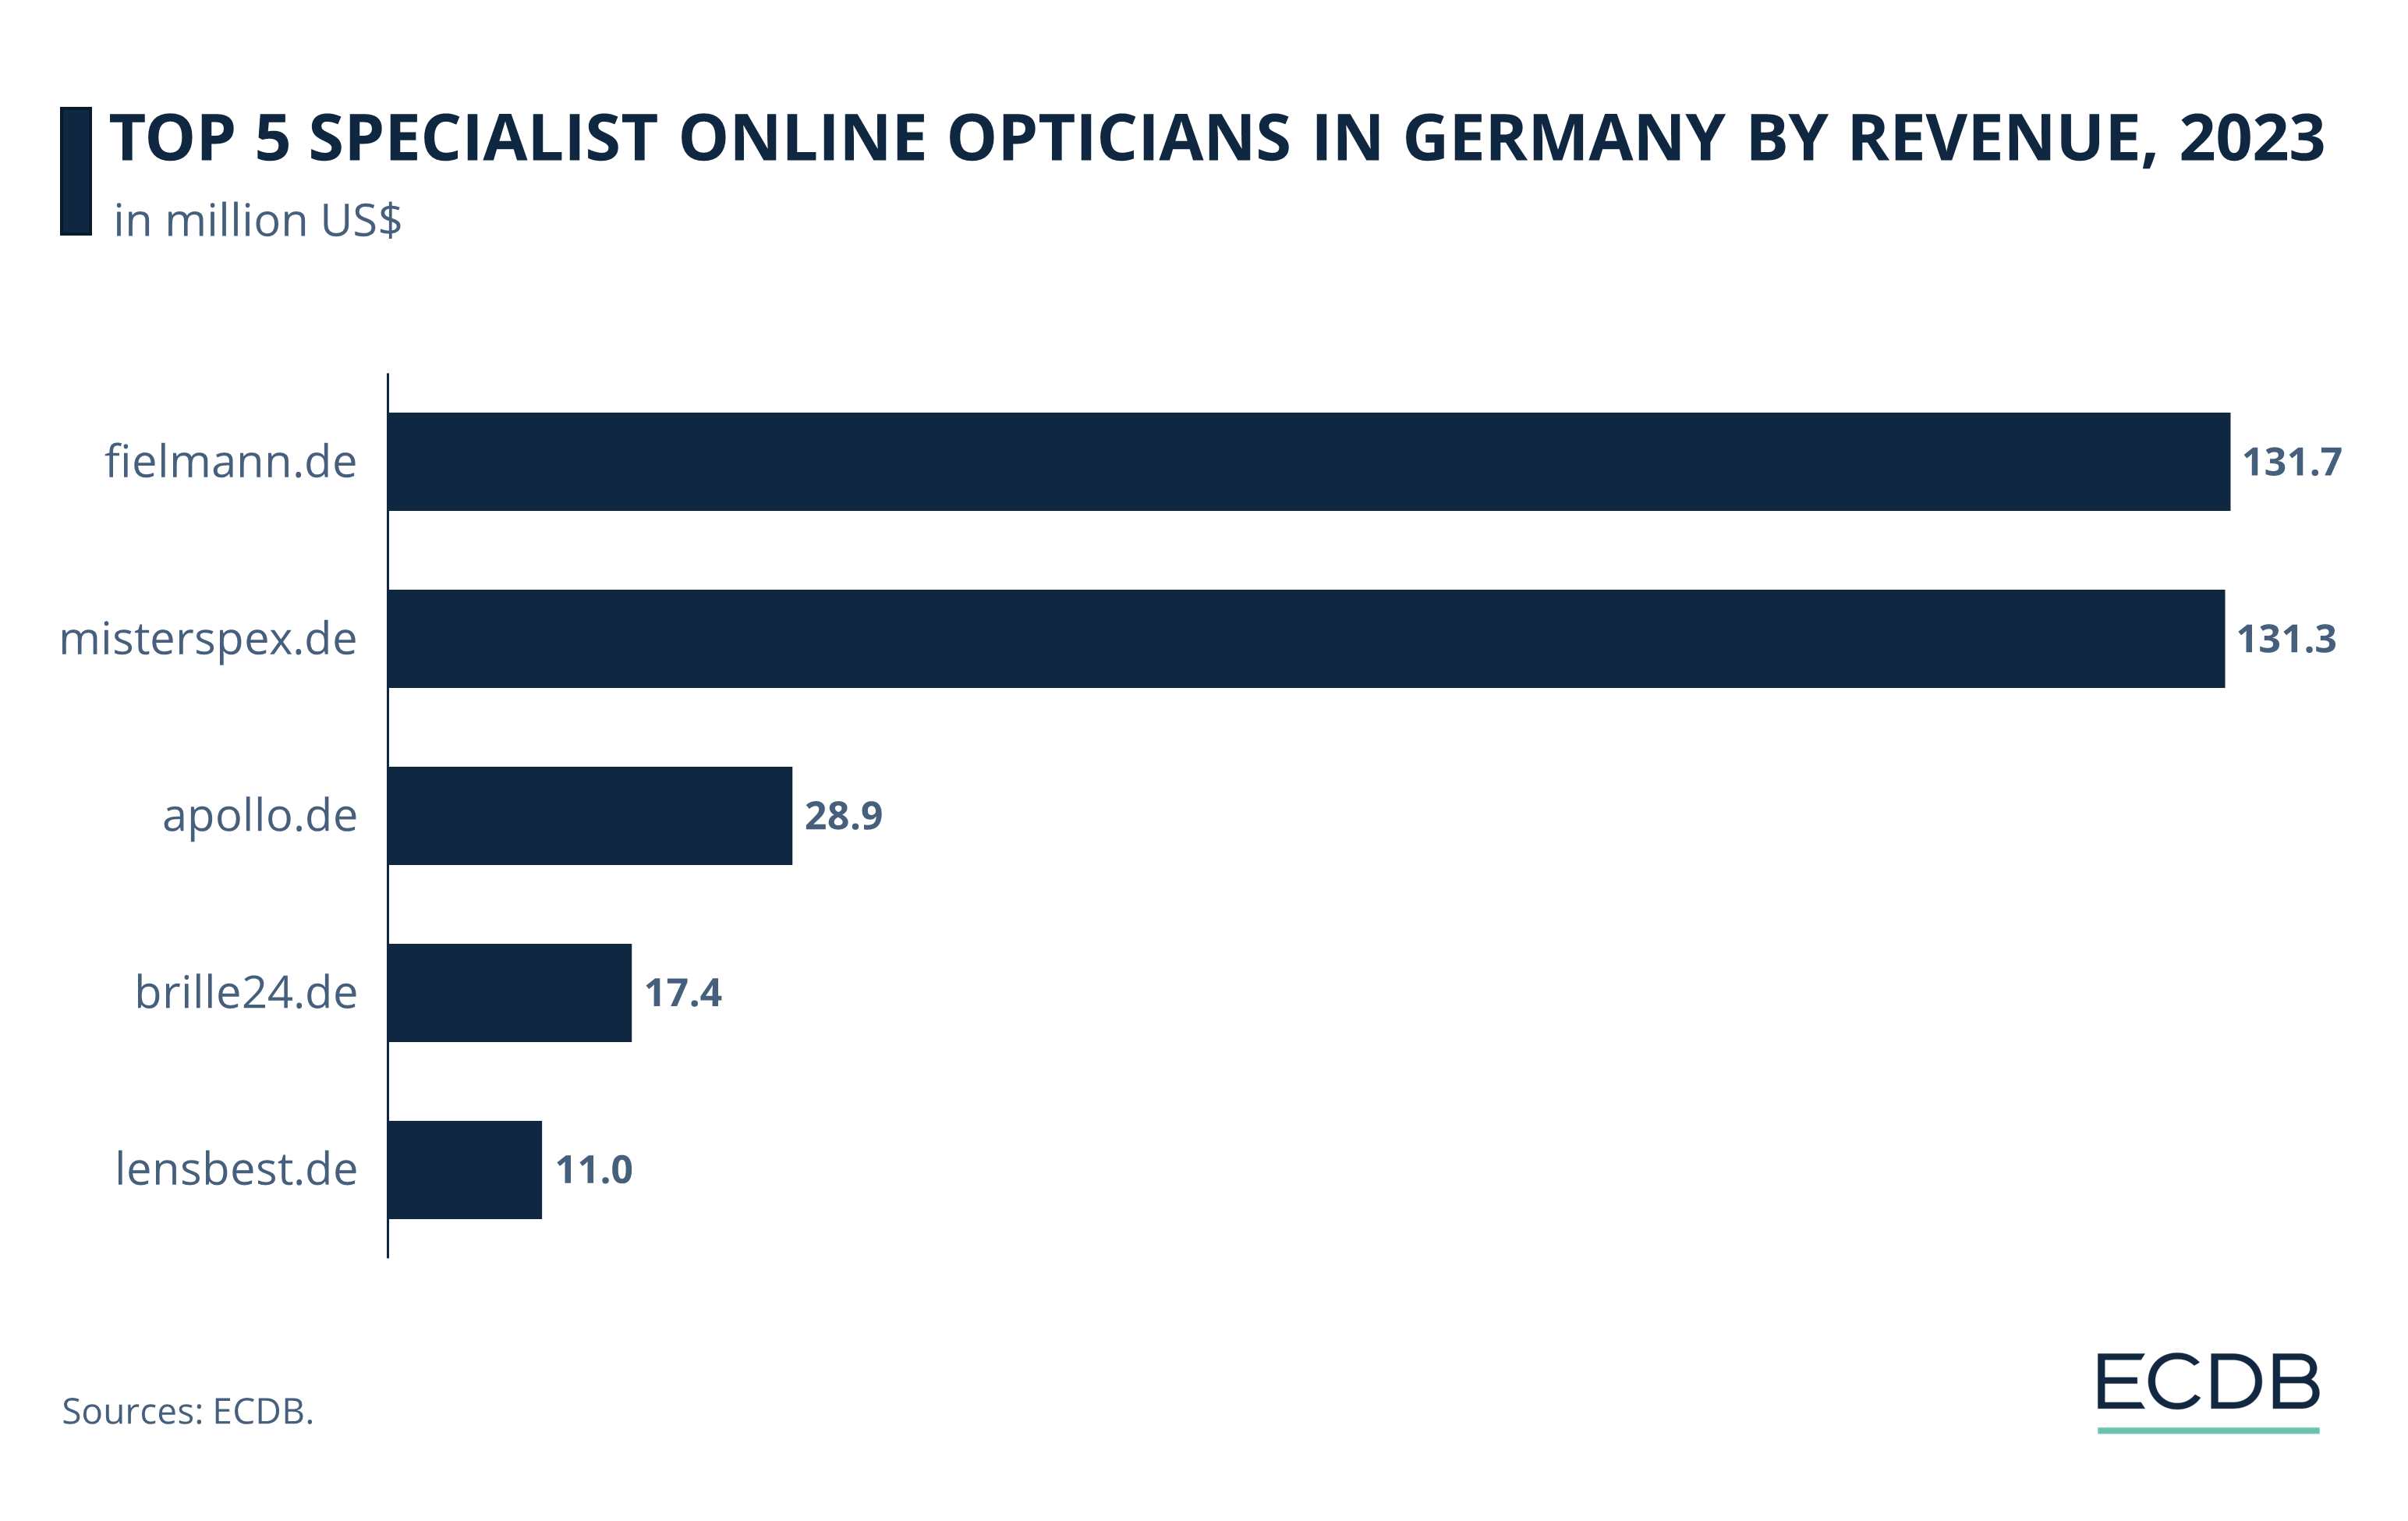 Top 5 Specialist Online Opticians in Germany by Revenue, 2023